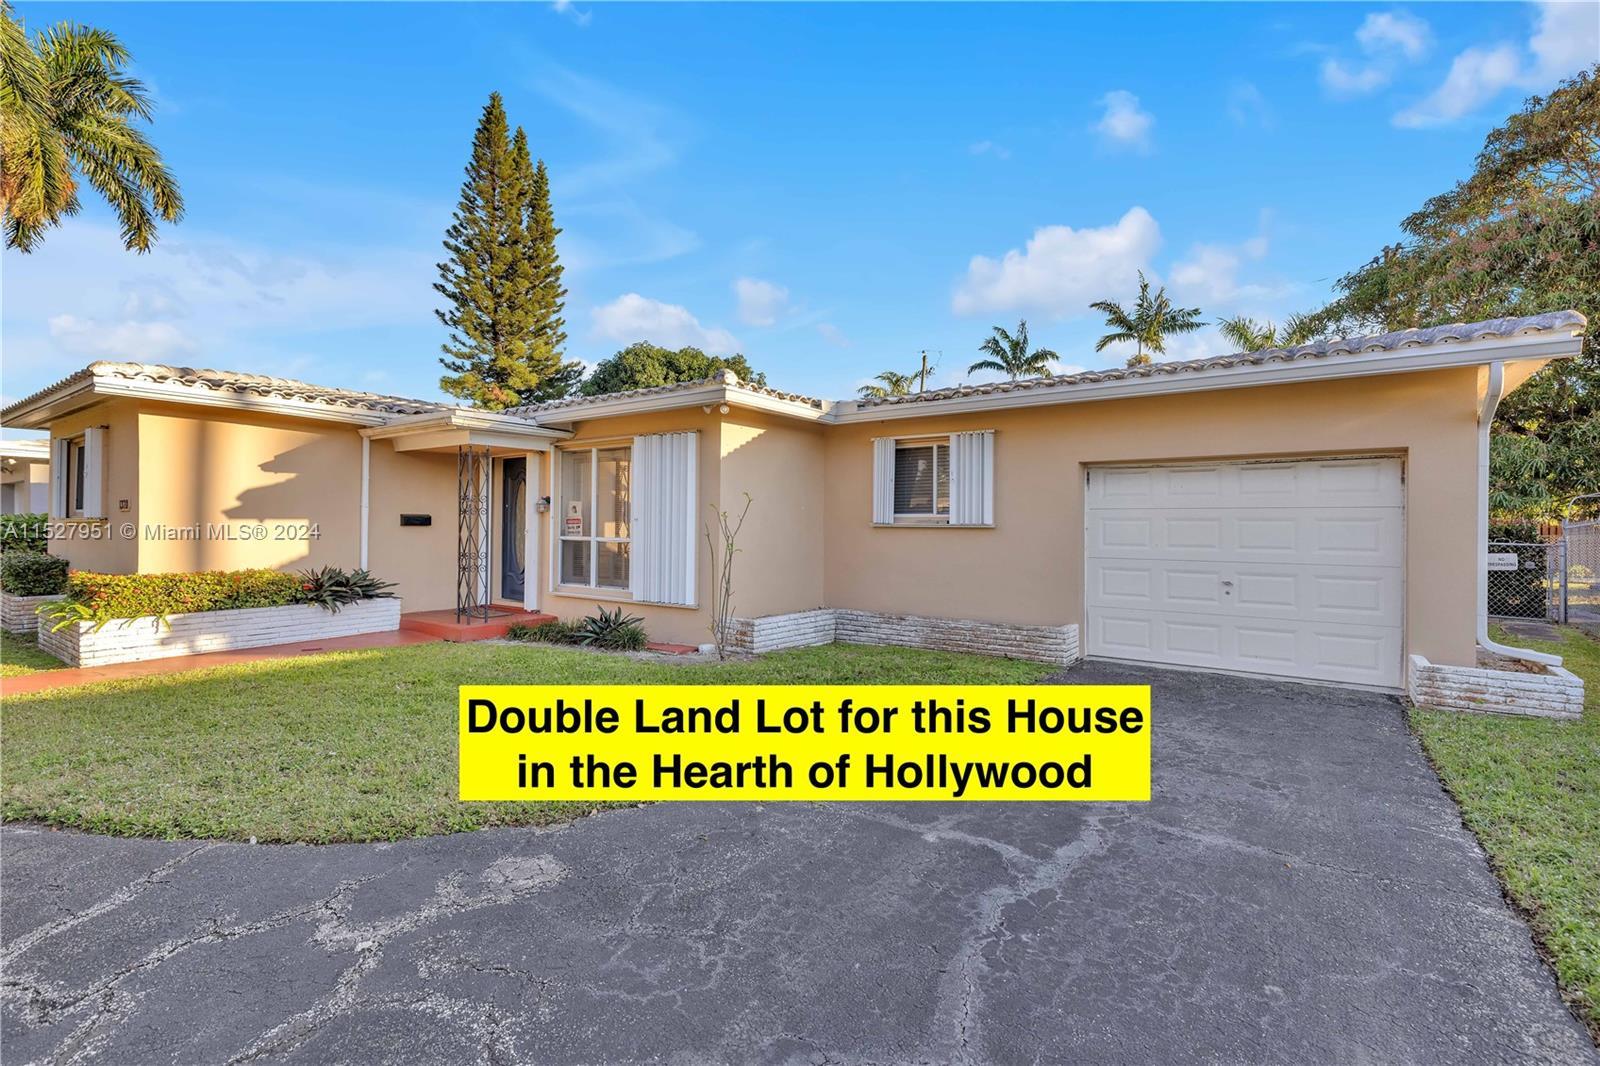 8,060 Sqft lot. !!!!!! Centrally located, this Hollywood residence offers convenient access to  near